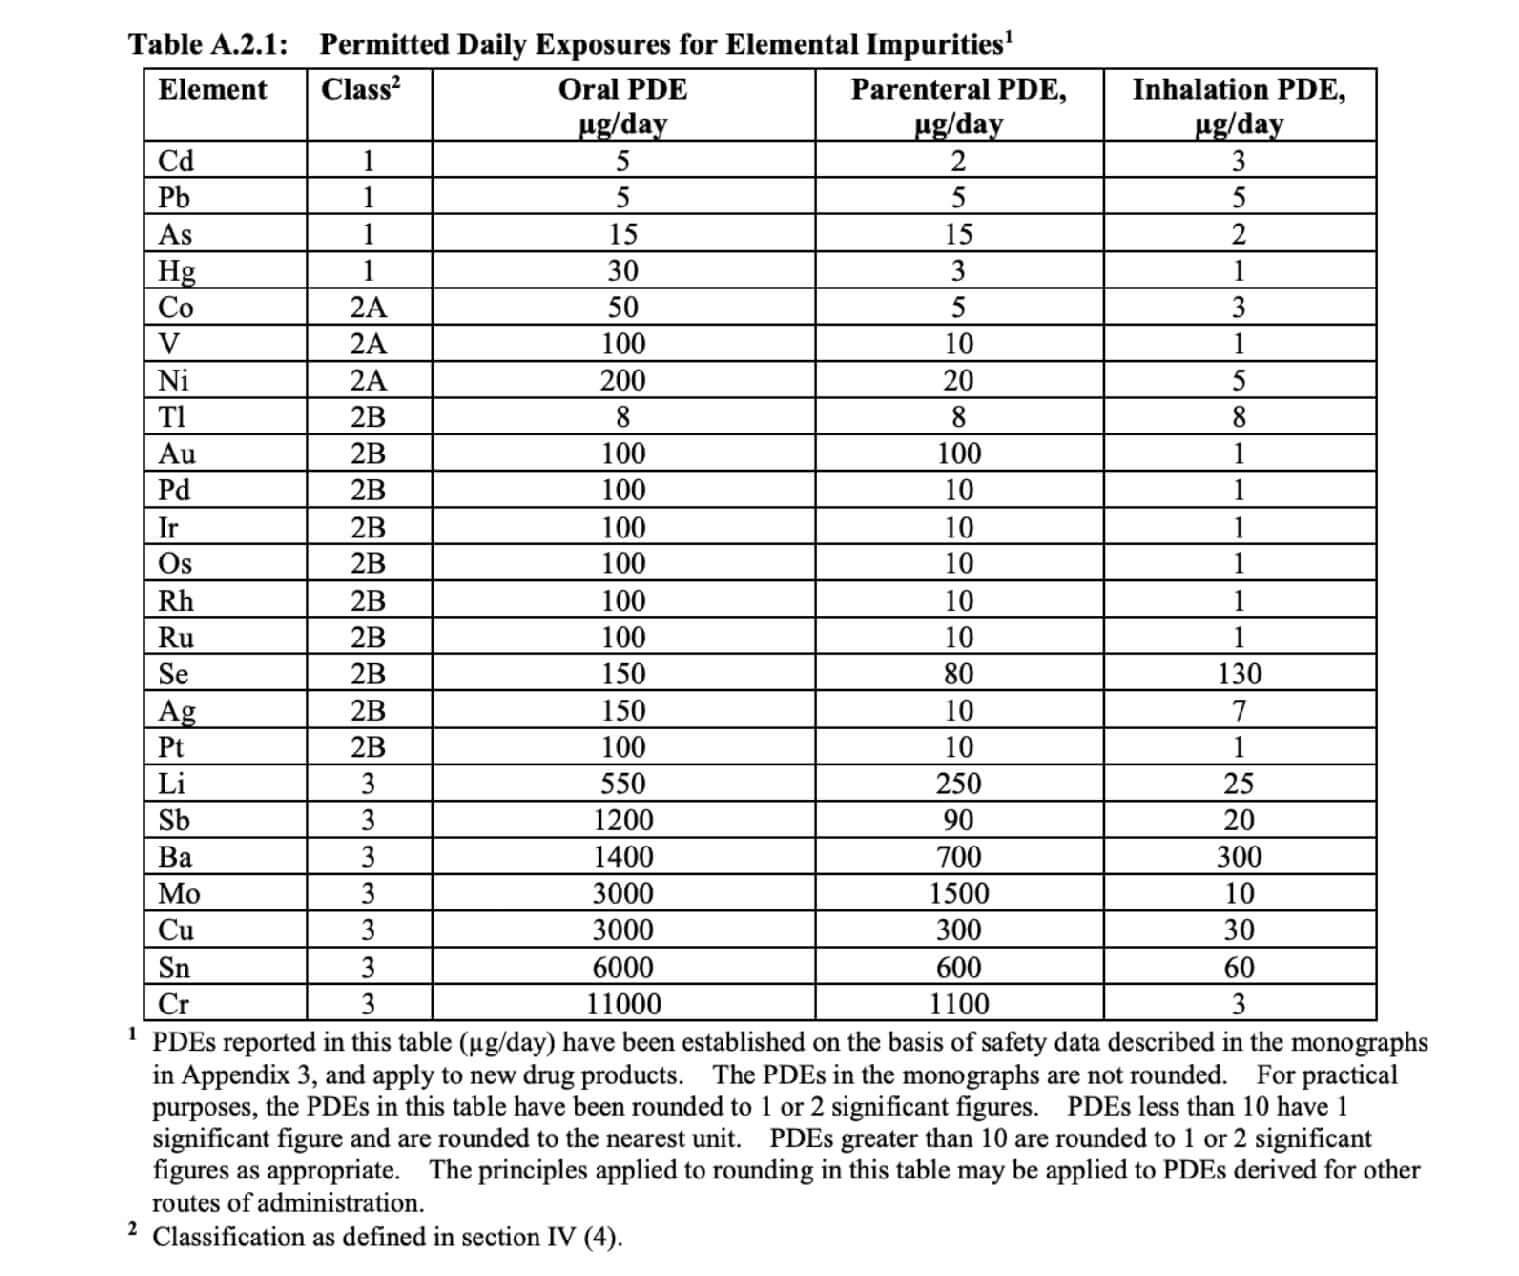 Table2: permitted daily exposures for elemental impurities